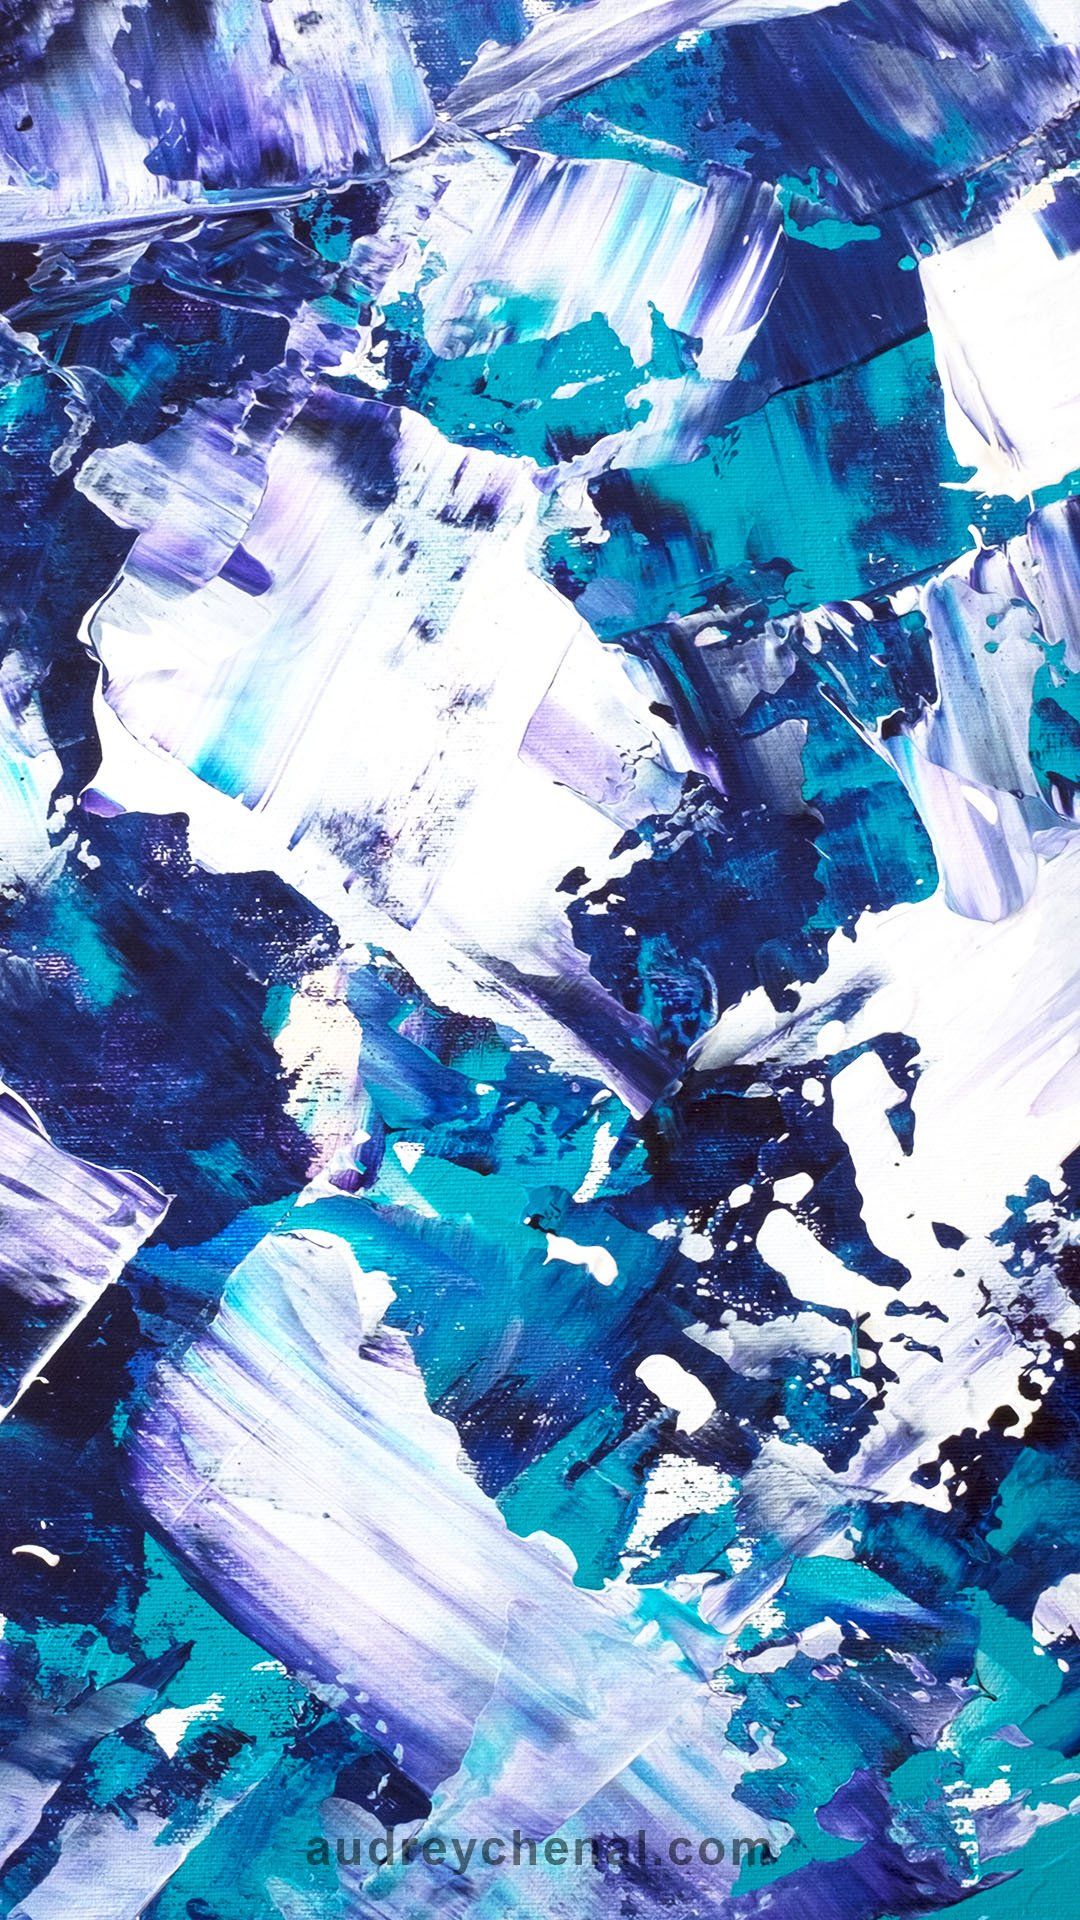 Purple turquoise blue abstract brushstrokes acrylic painting wallpaper by Audrey Chenal 2